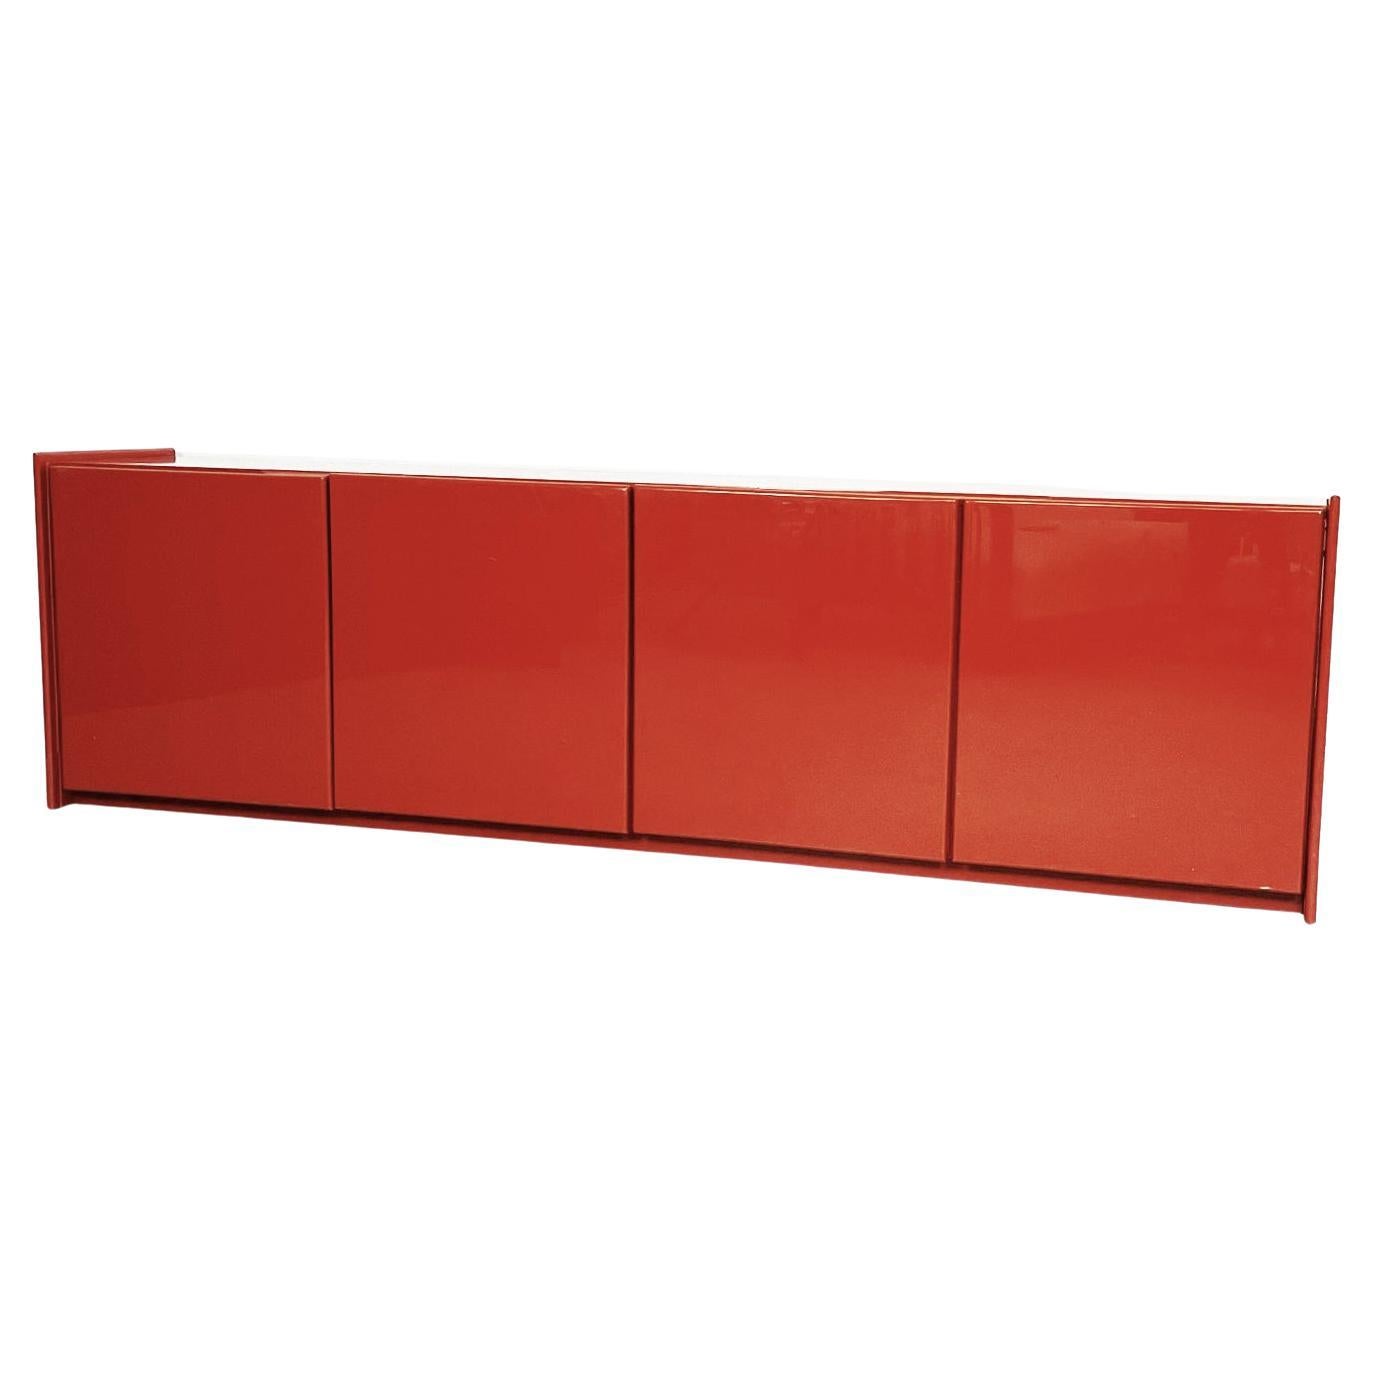 Italian Mid-Century Modern Rectangular Red Lacquered Solid Wood Sideboard, 1980s For Sale